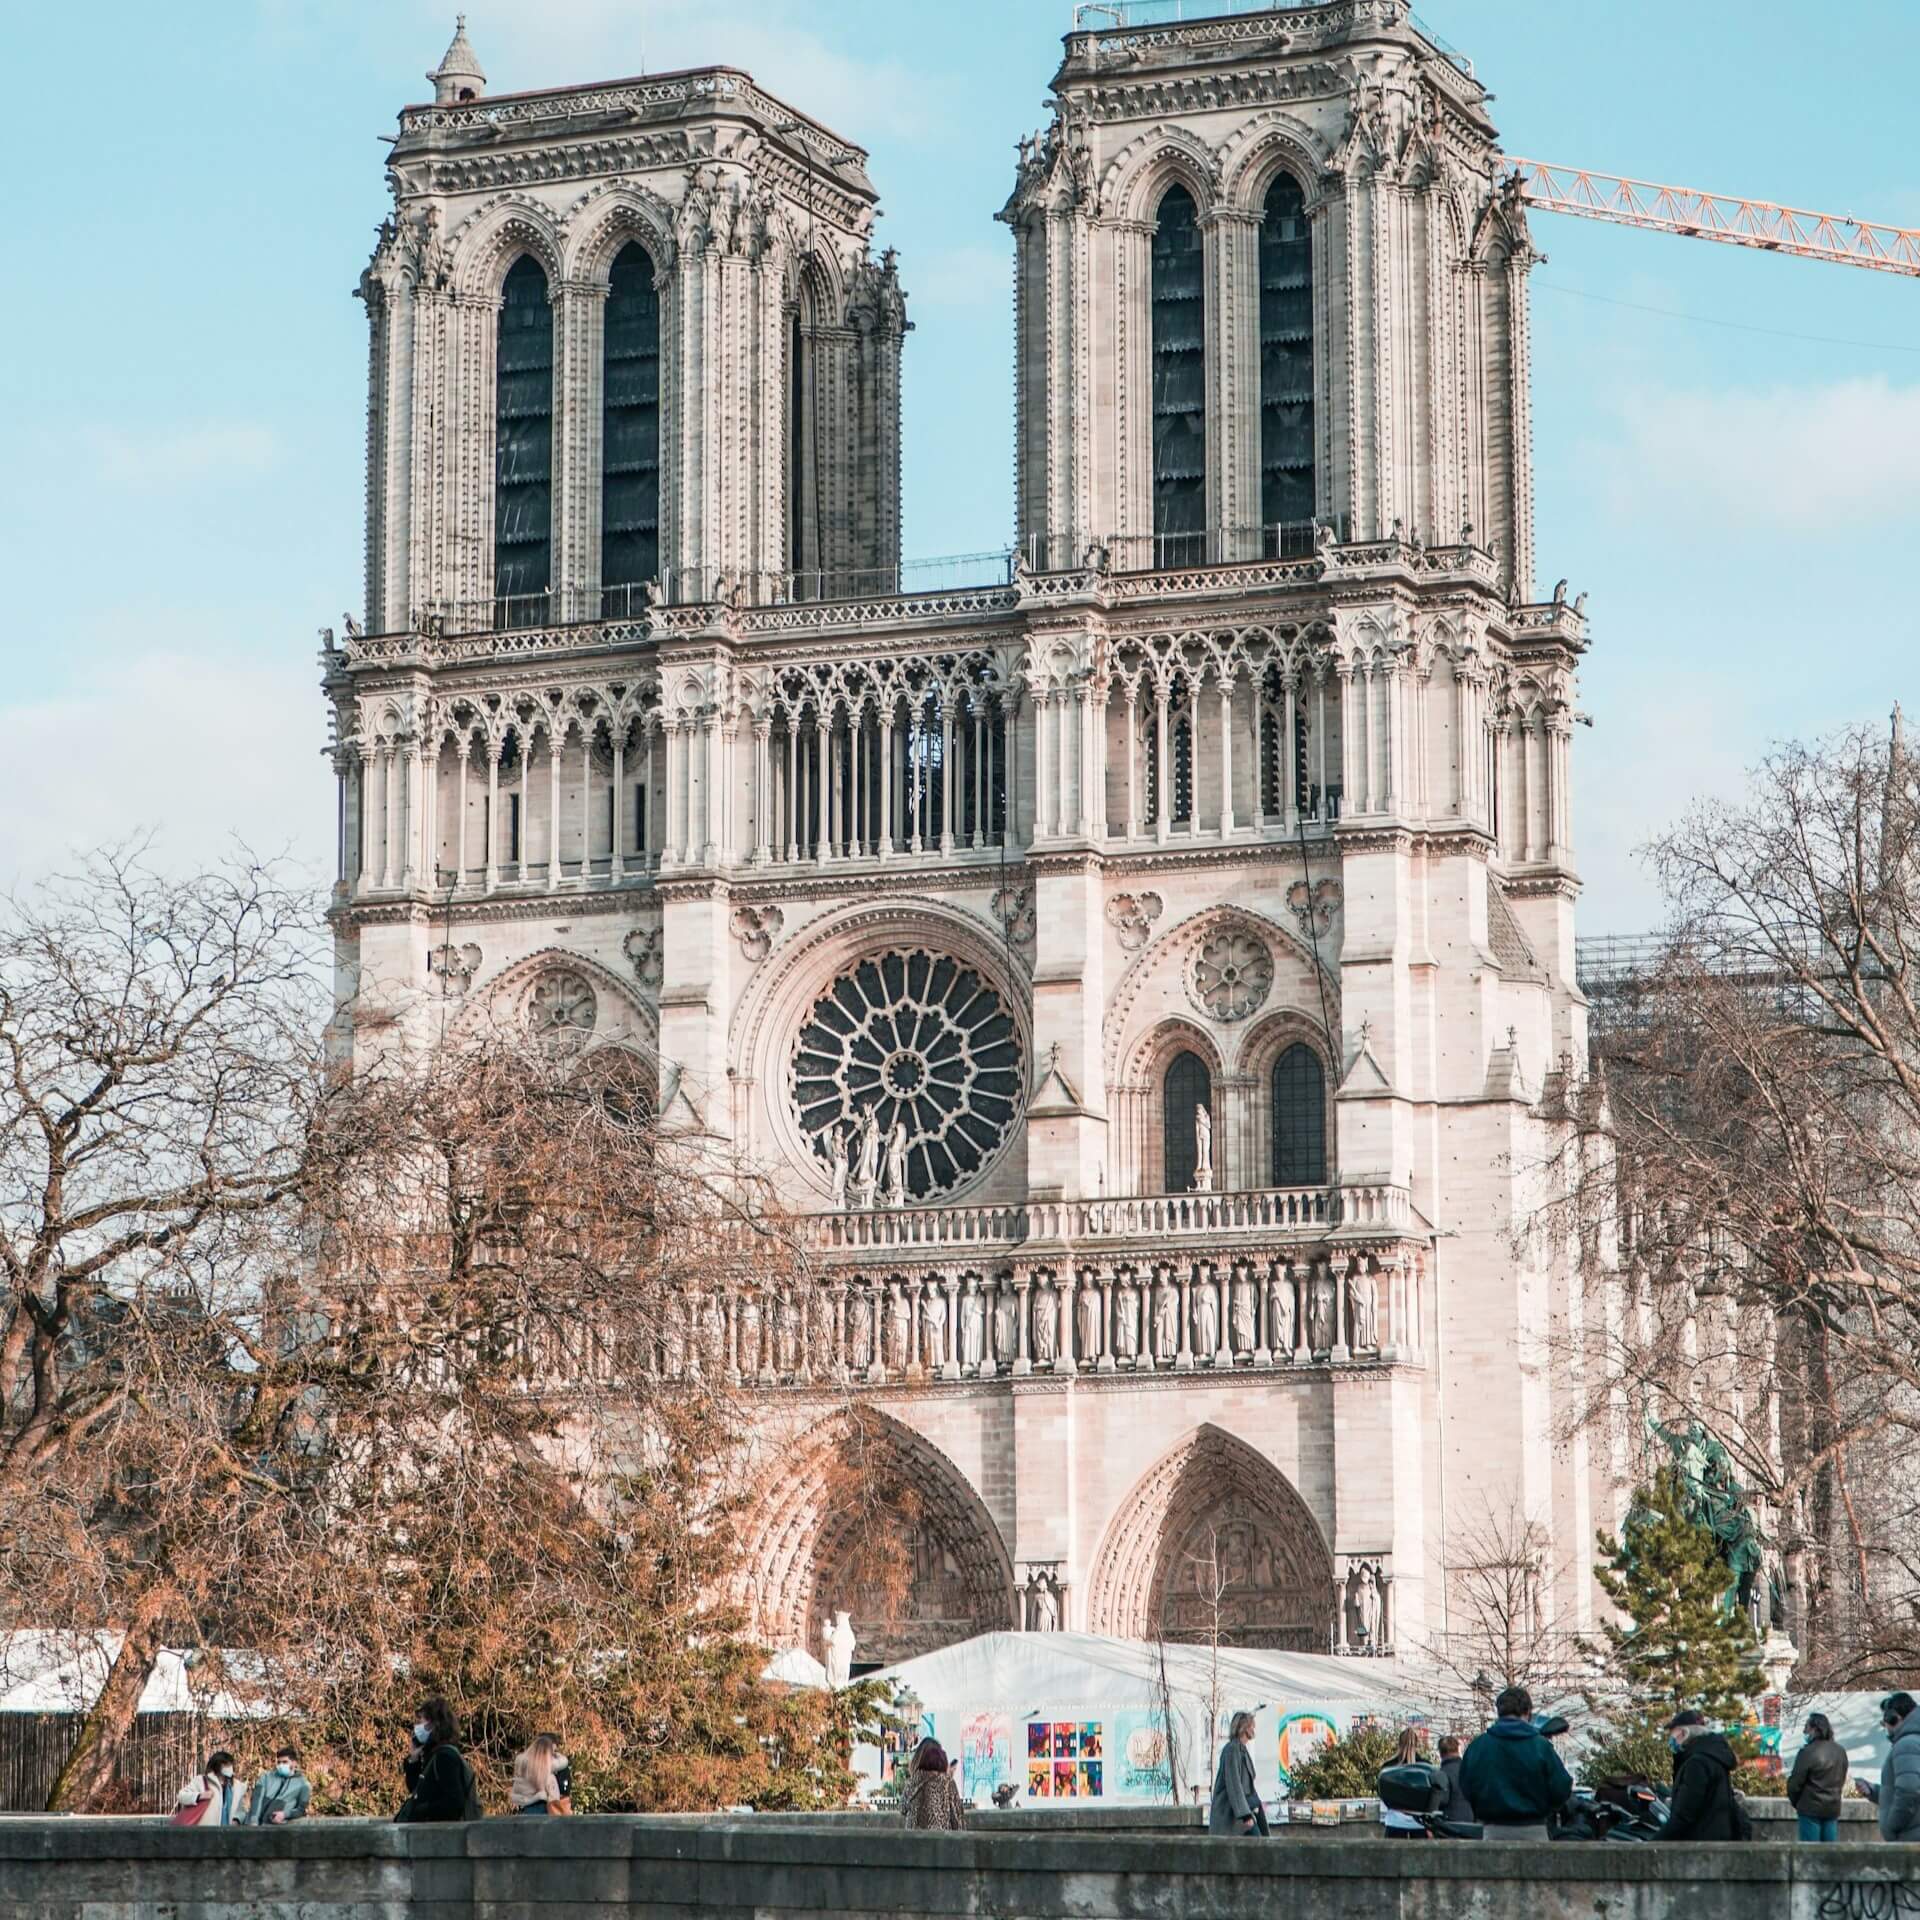 Notre-Dame’s restoration efforts have made great progress over the past five years